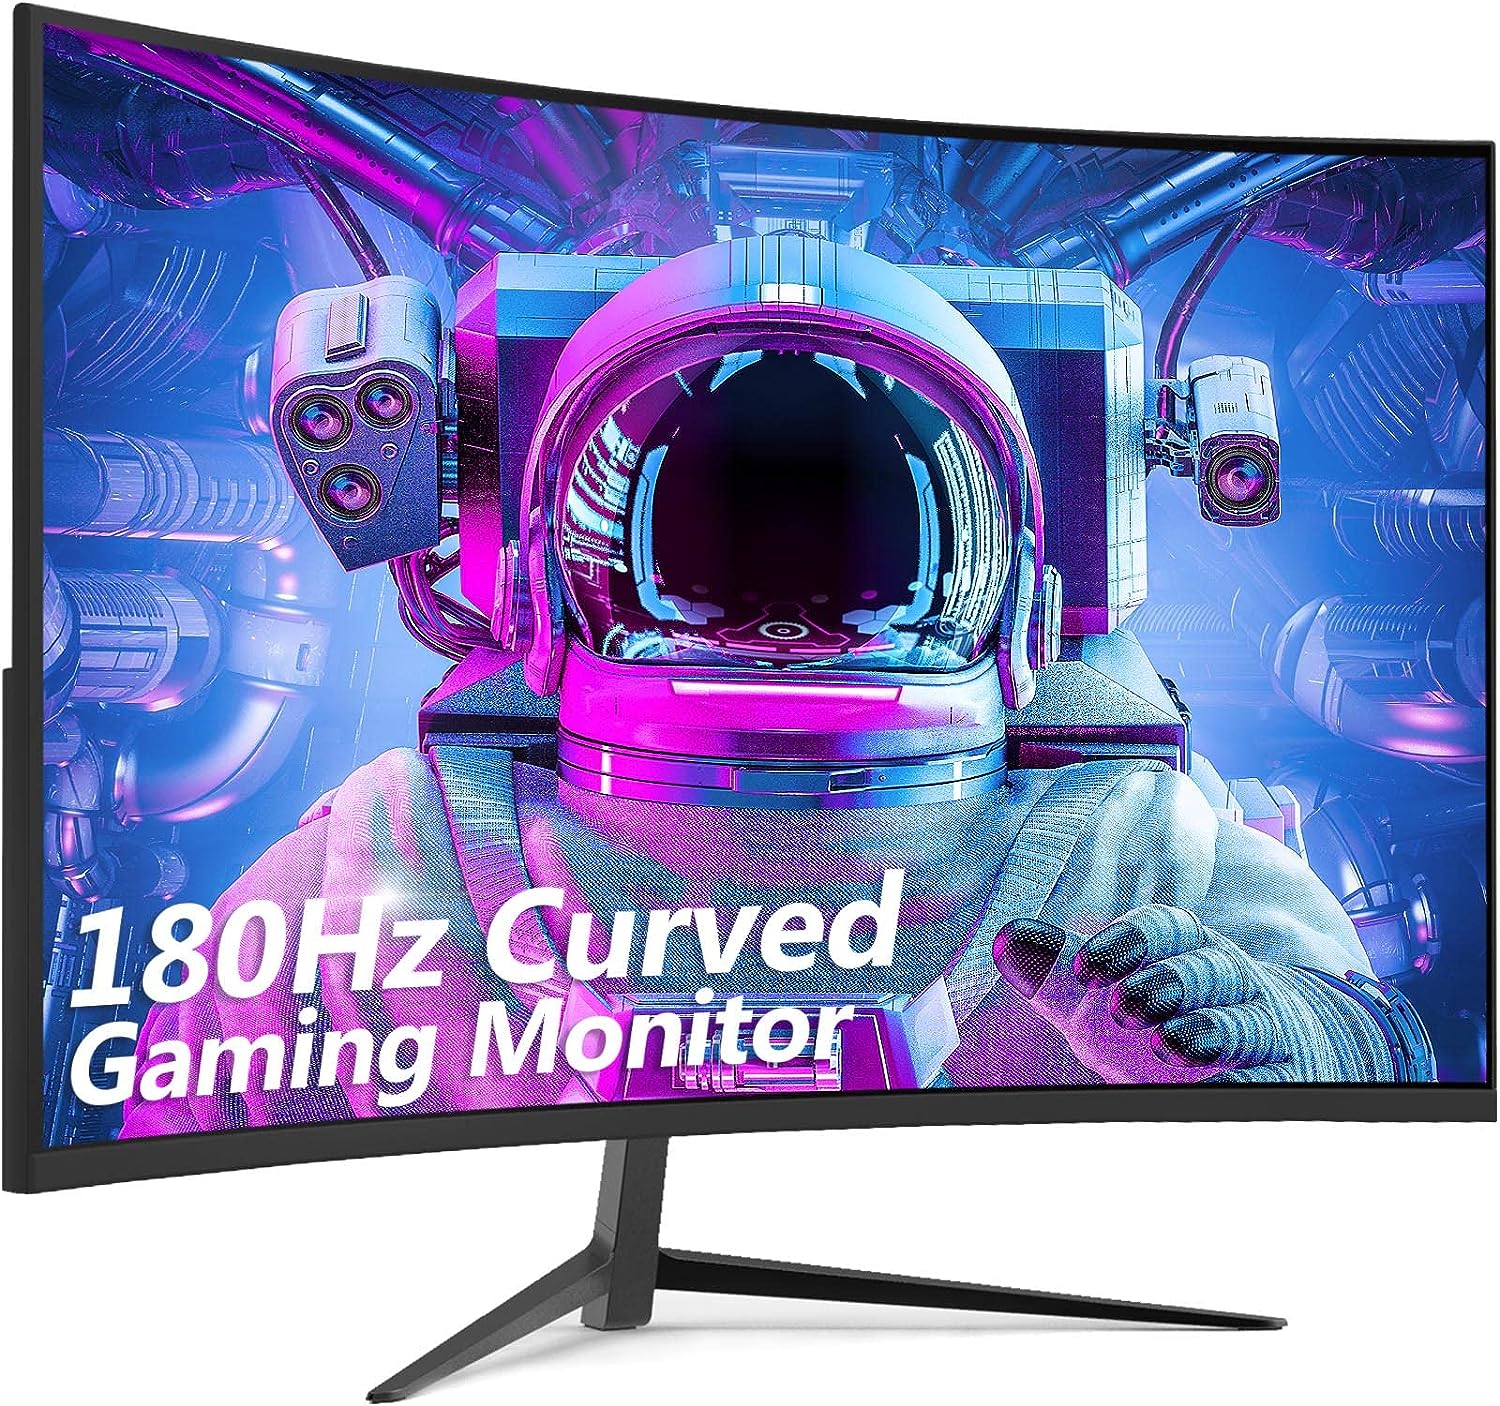 Z-Edge UG24 24-inch Gaming Monitor 180Hz Refresh Rate, [...]